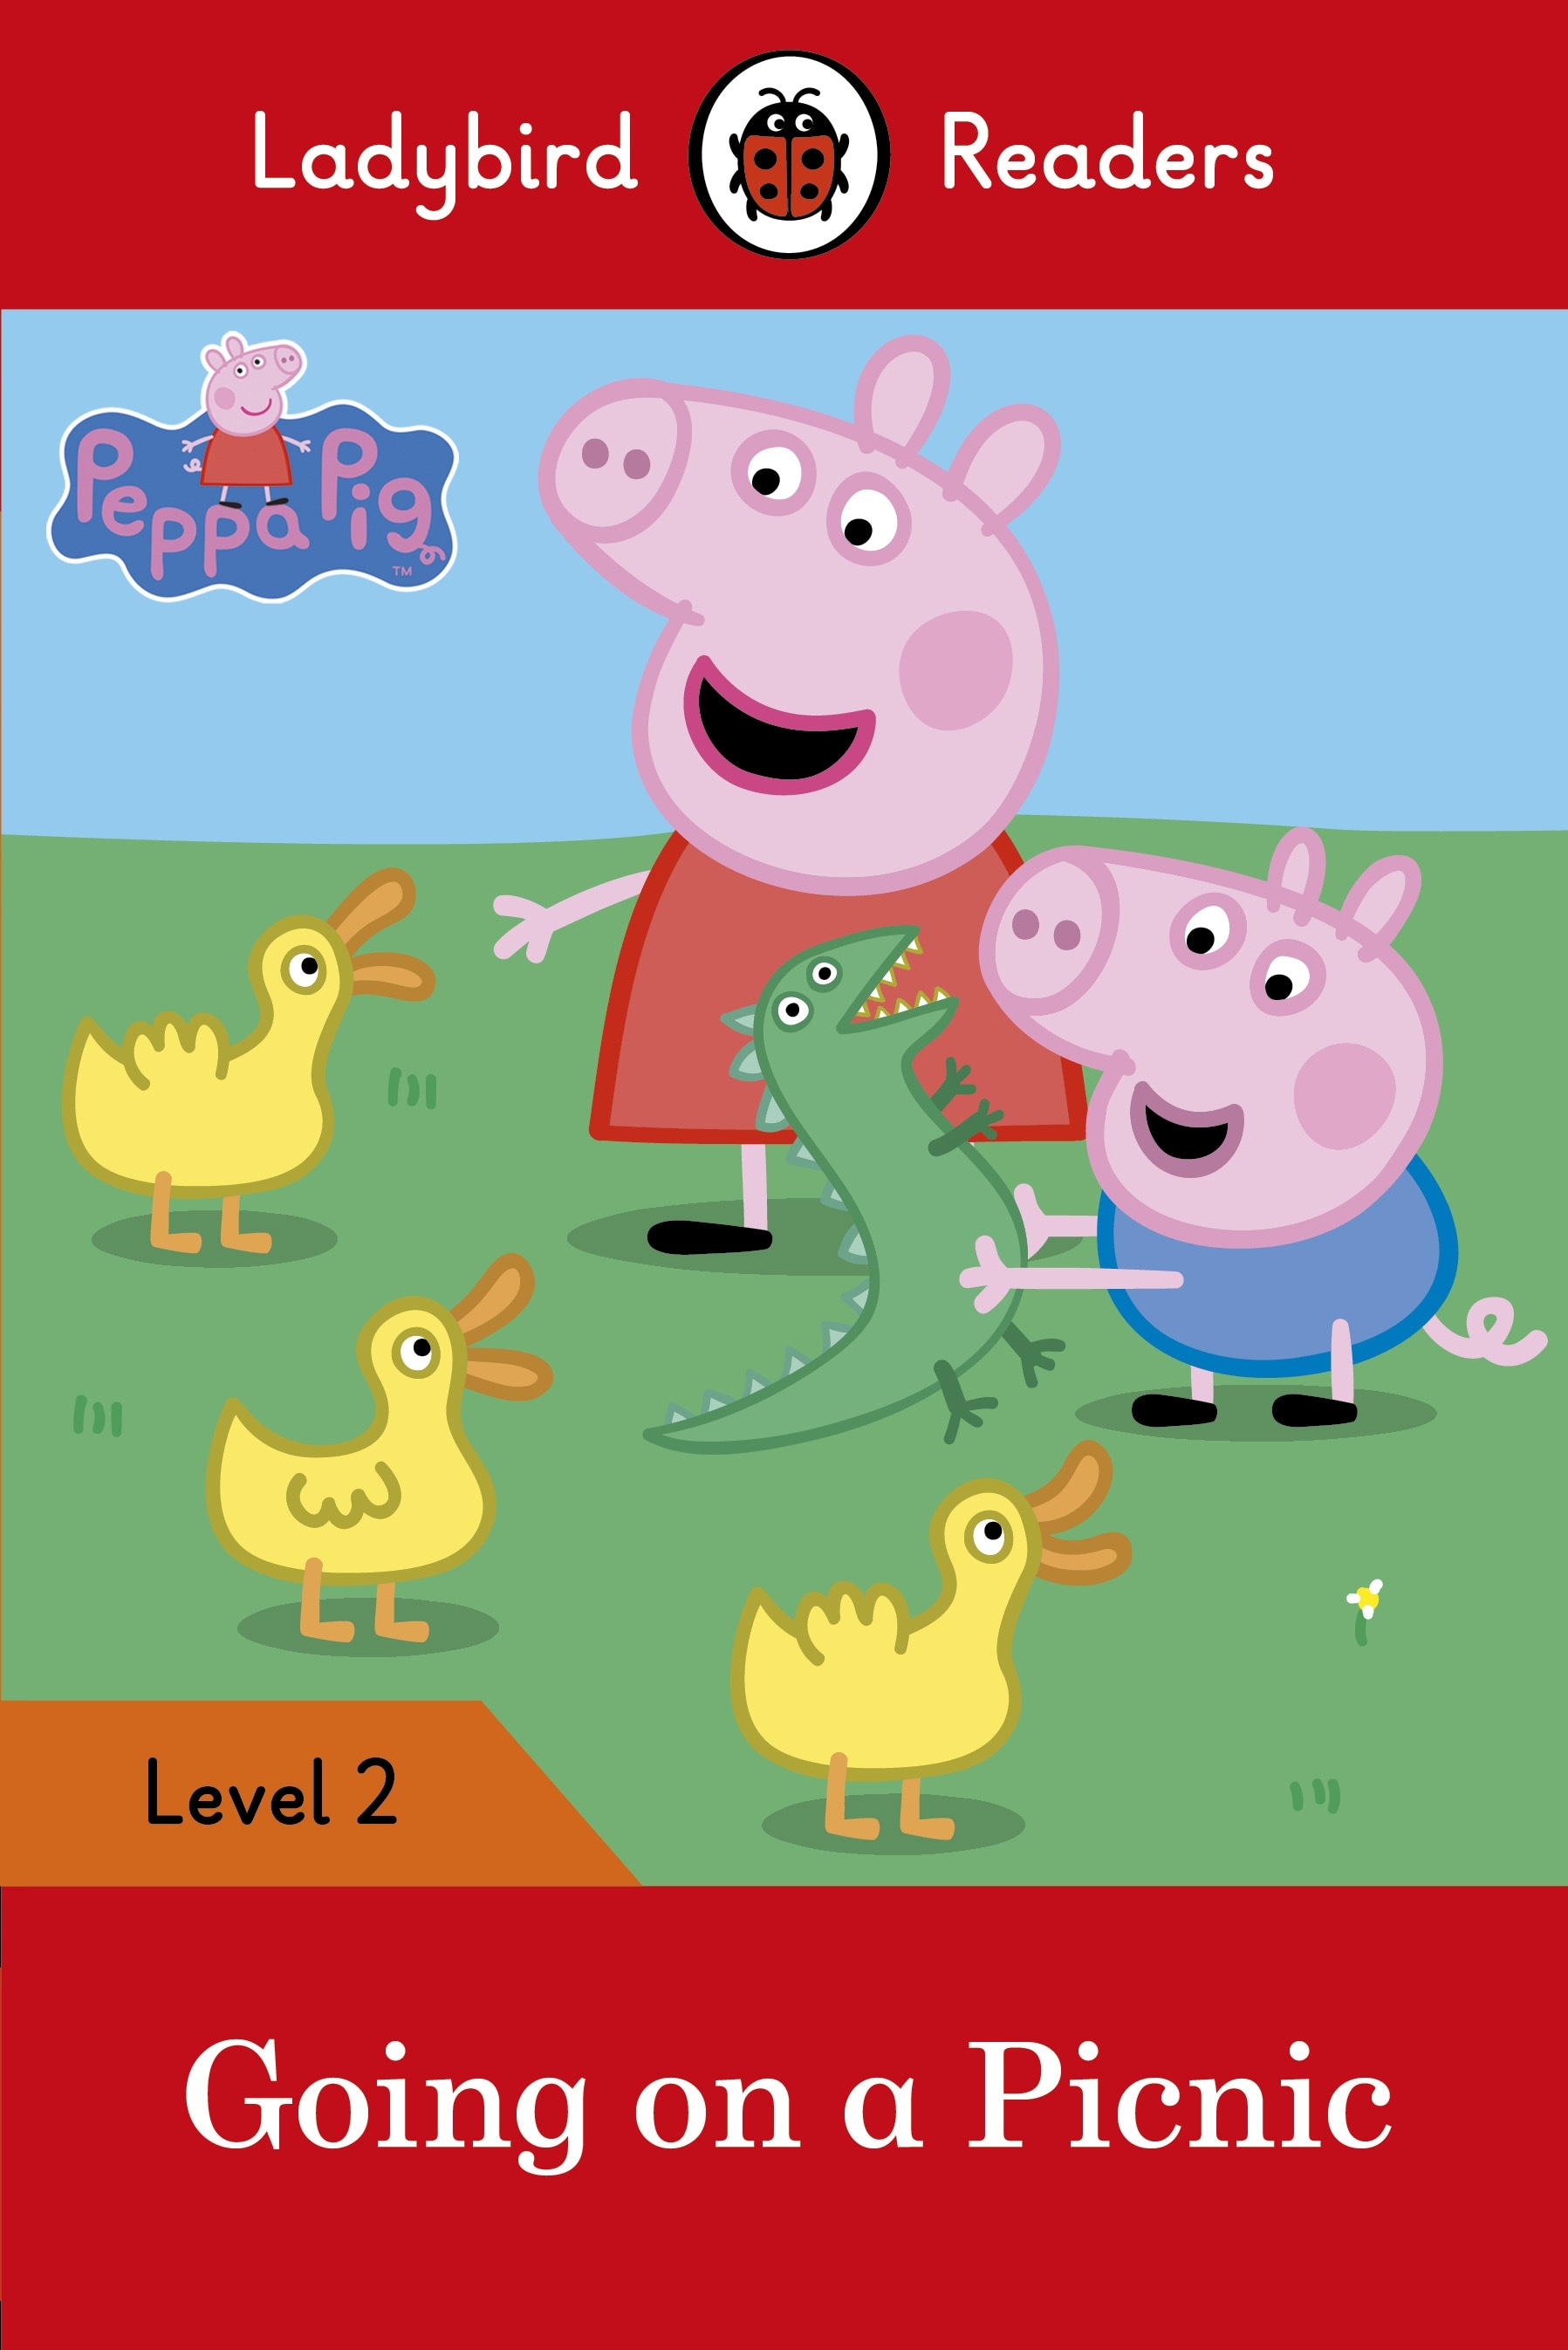 Book “Peppa Pig: Going on a Picnic – Ladybird Readers Level 2” by Ladybird, Peppa Pig — July 7, 2016